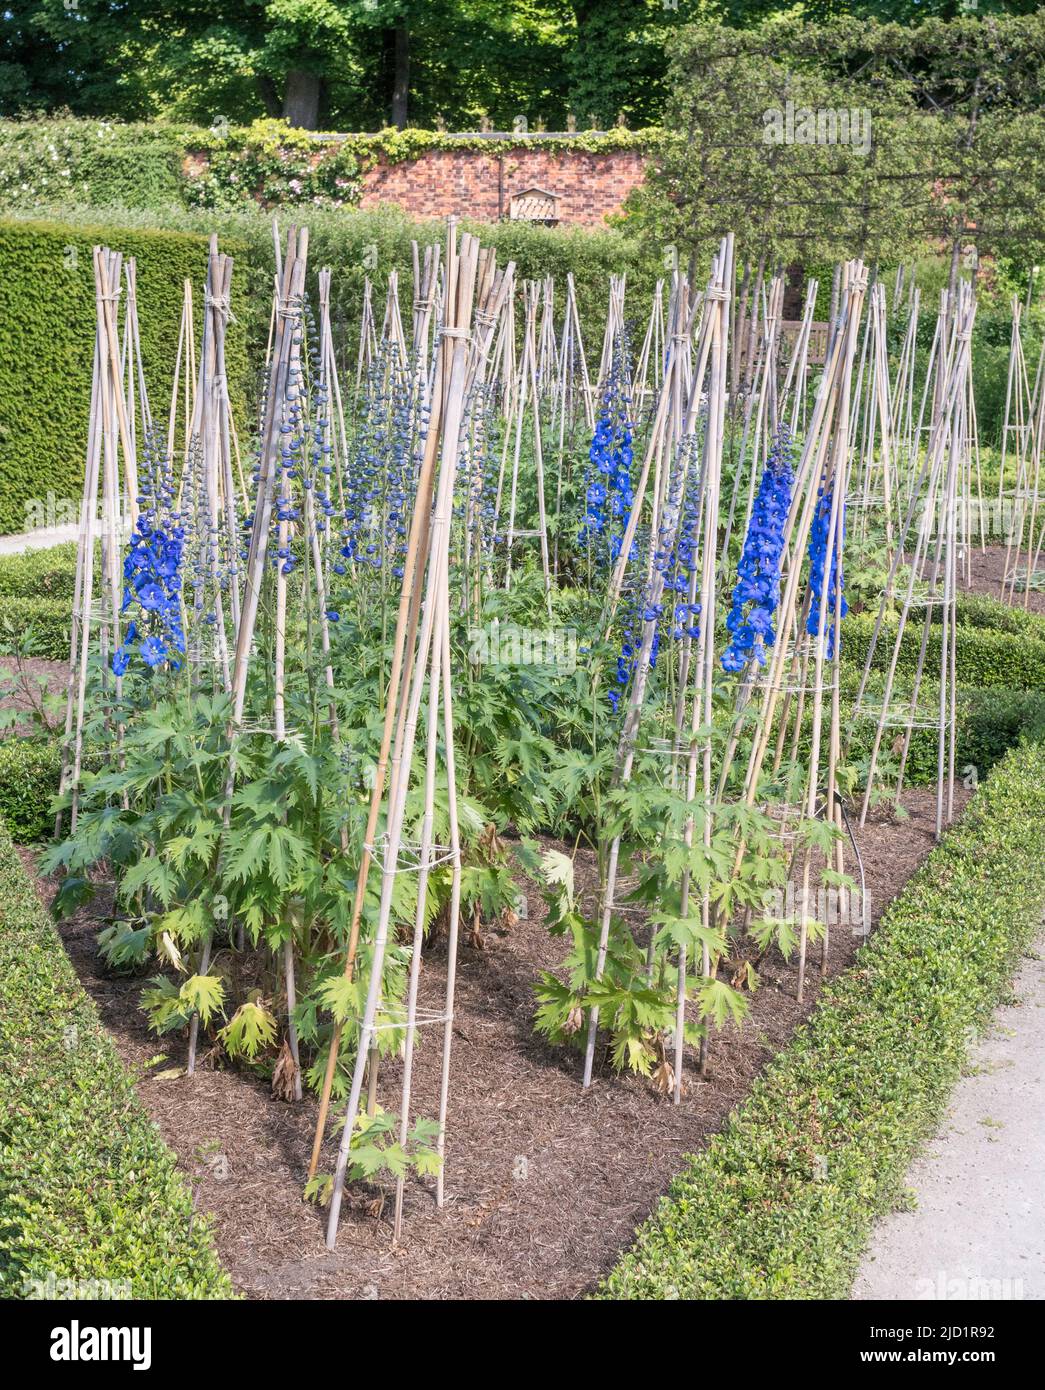 Wigwams of bamboo canes used to support delphinium plants in Alnwick Gardens, Northumberland, England, UK Stock Photo